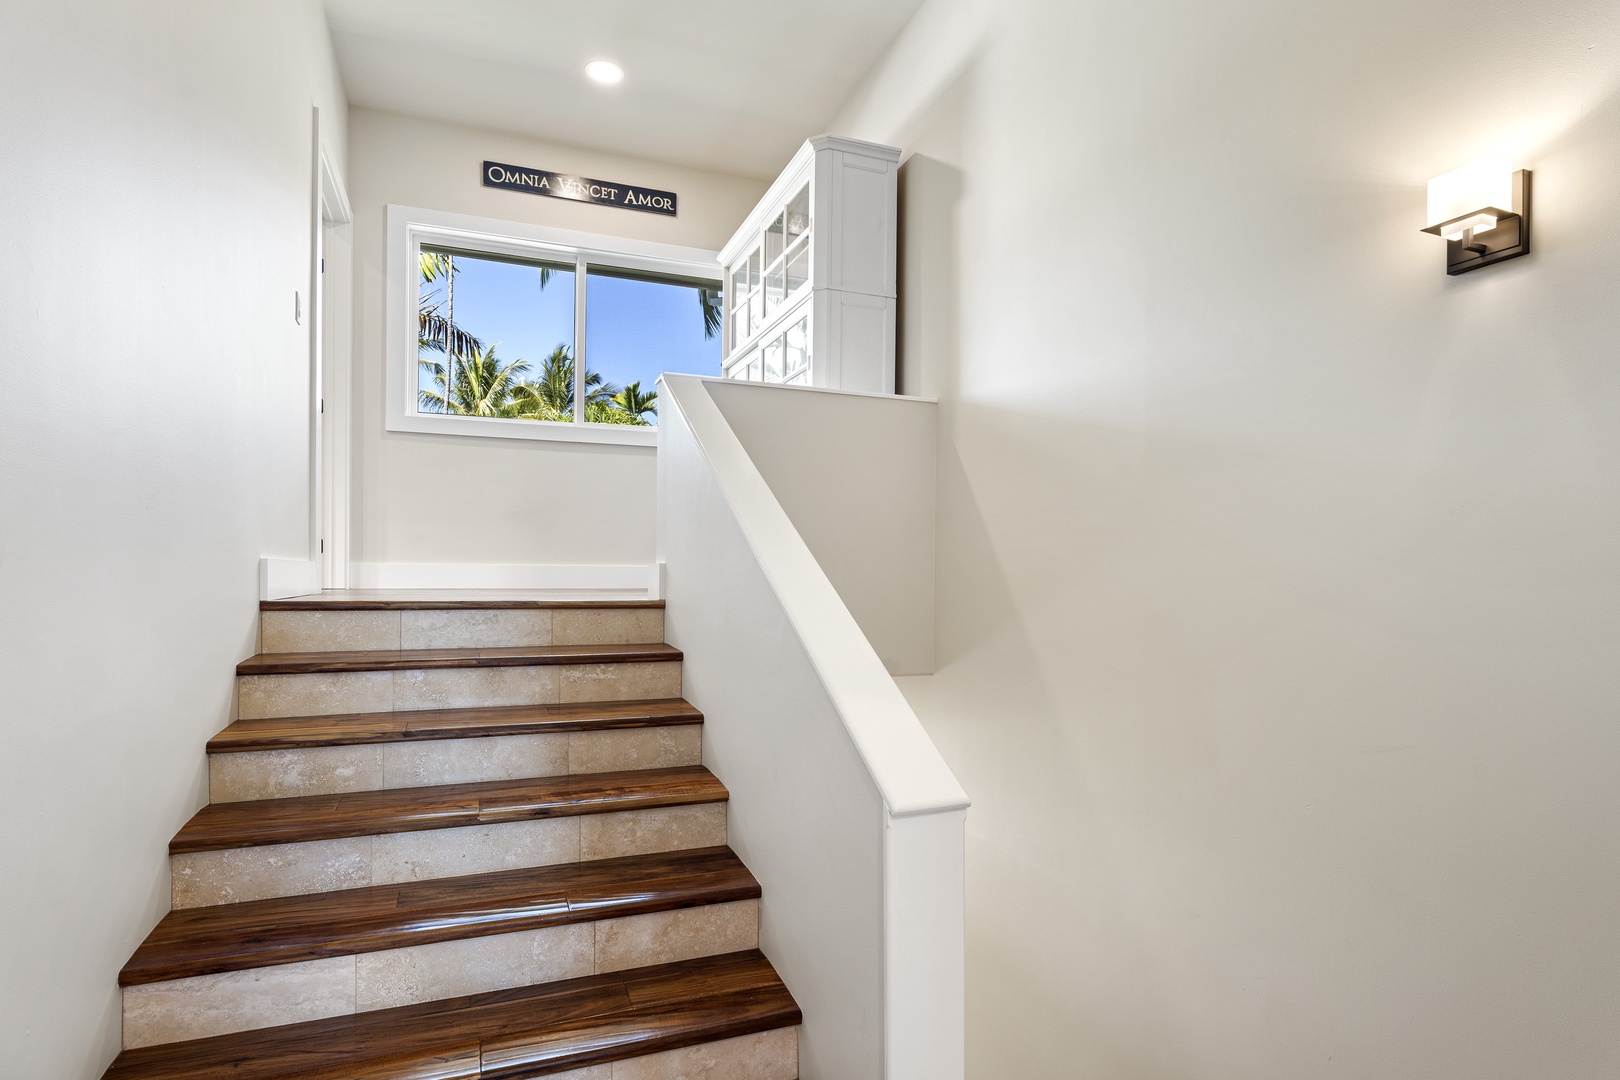 Kailua Kona Vacation Rentals, Ali'i Point #7 - Stairway to the upper level